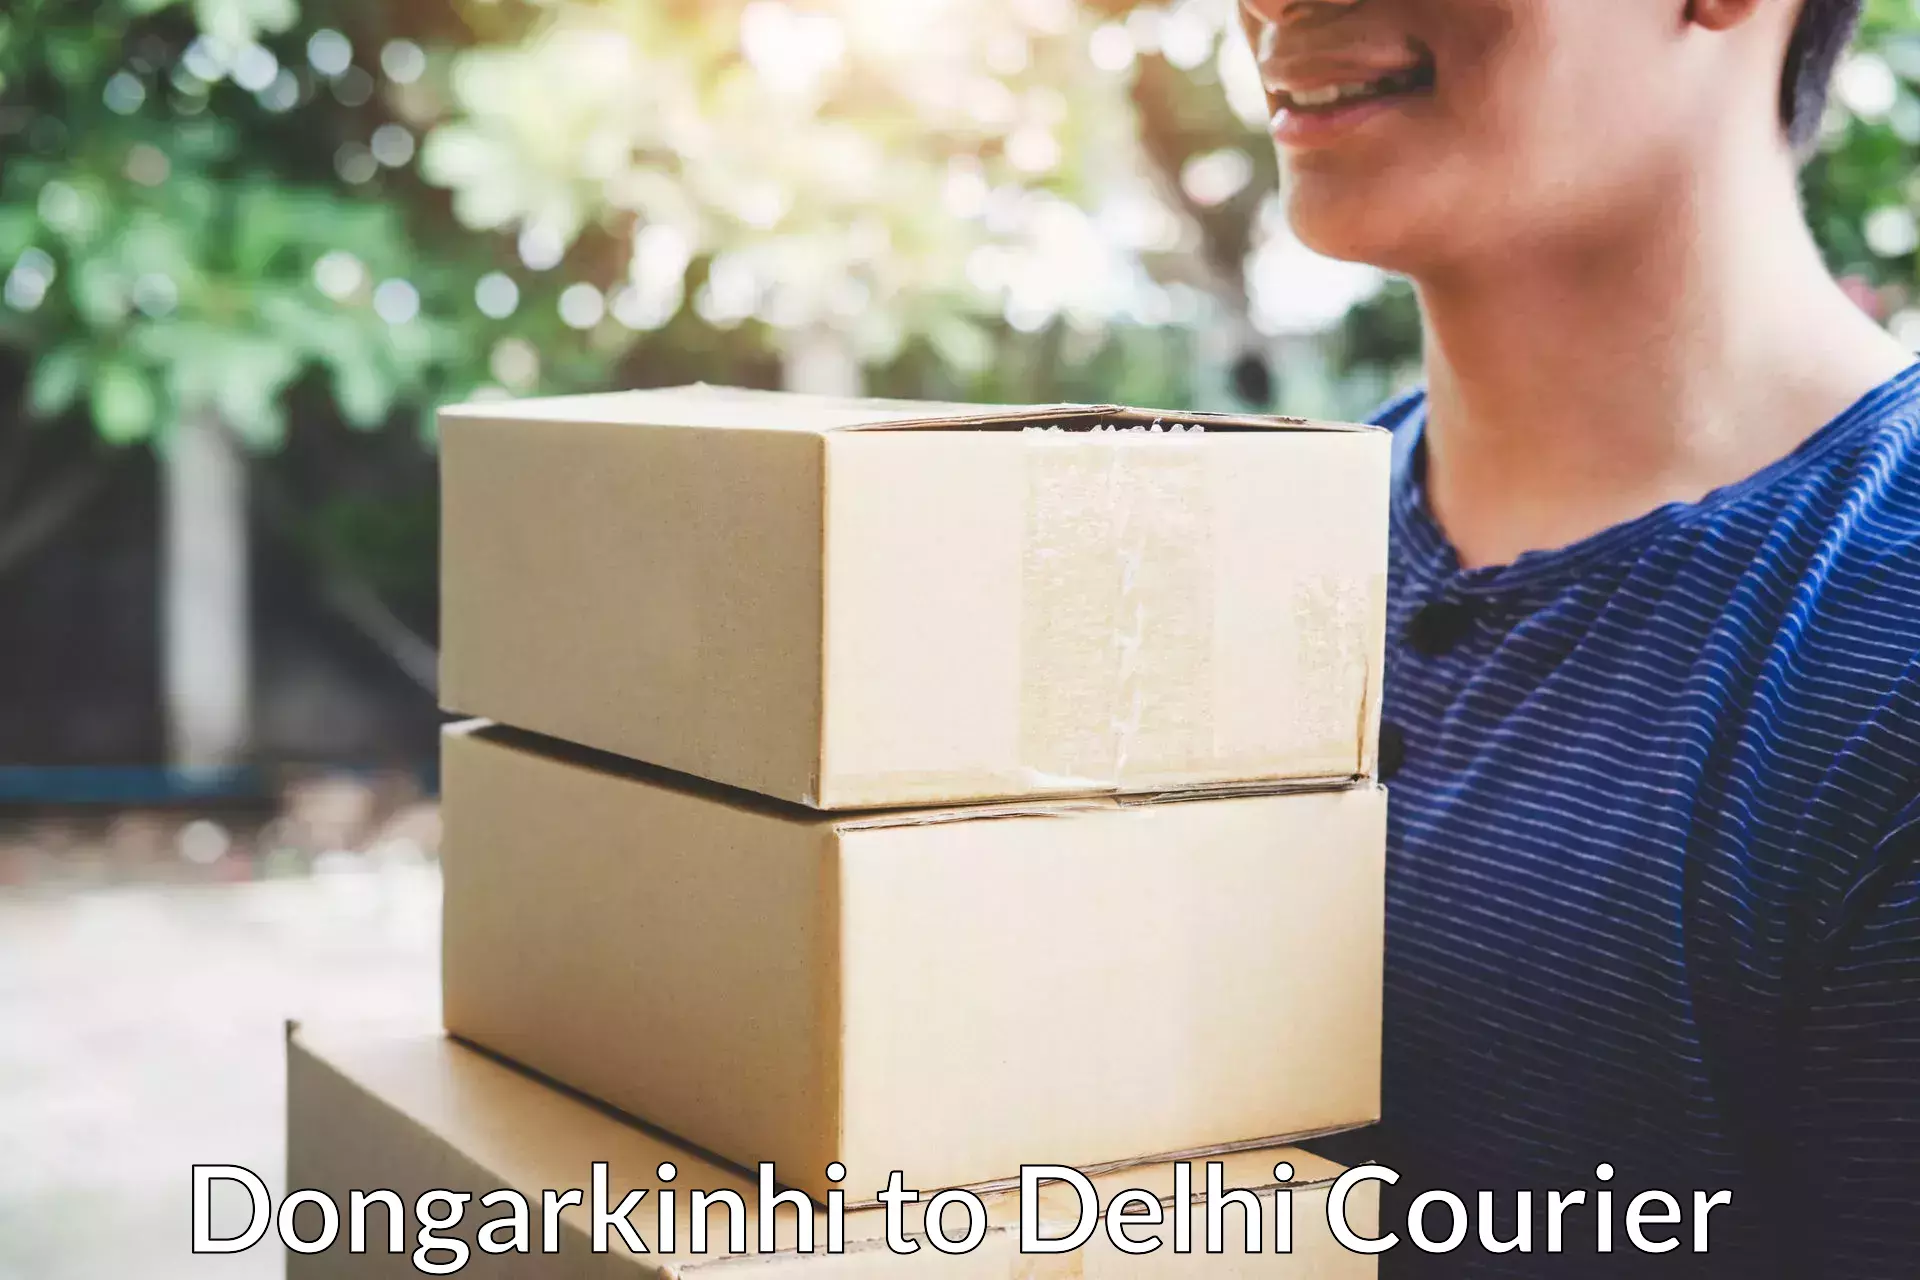 Professional household moving Dongarkinhi to Delhi